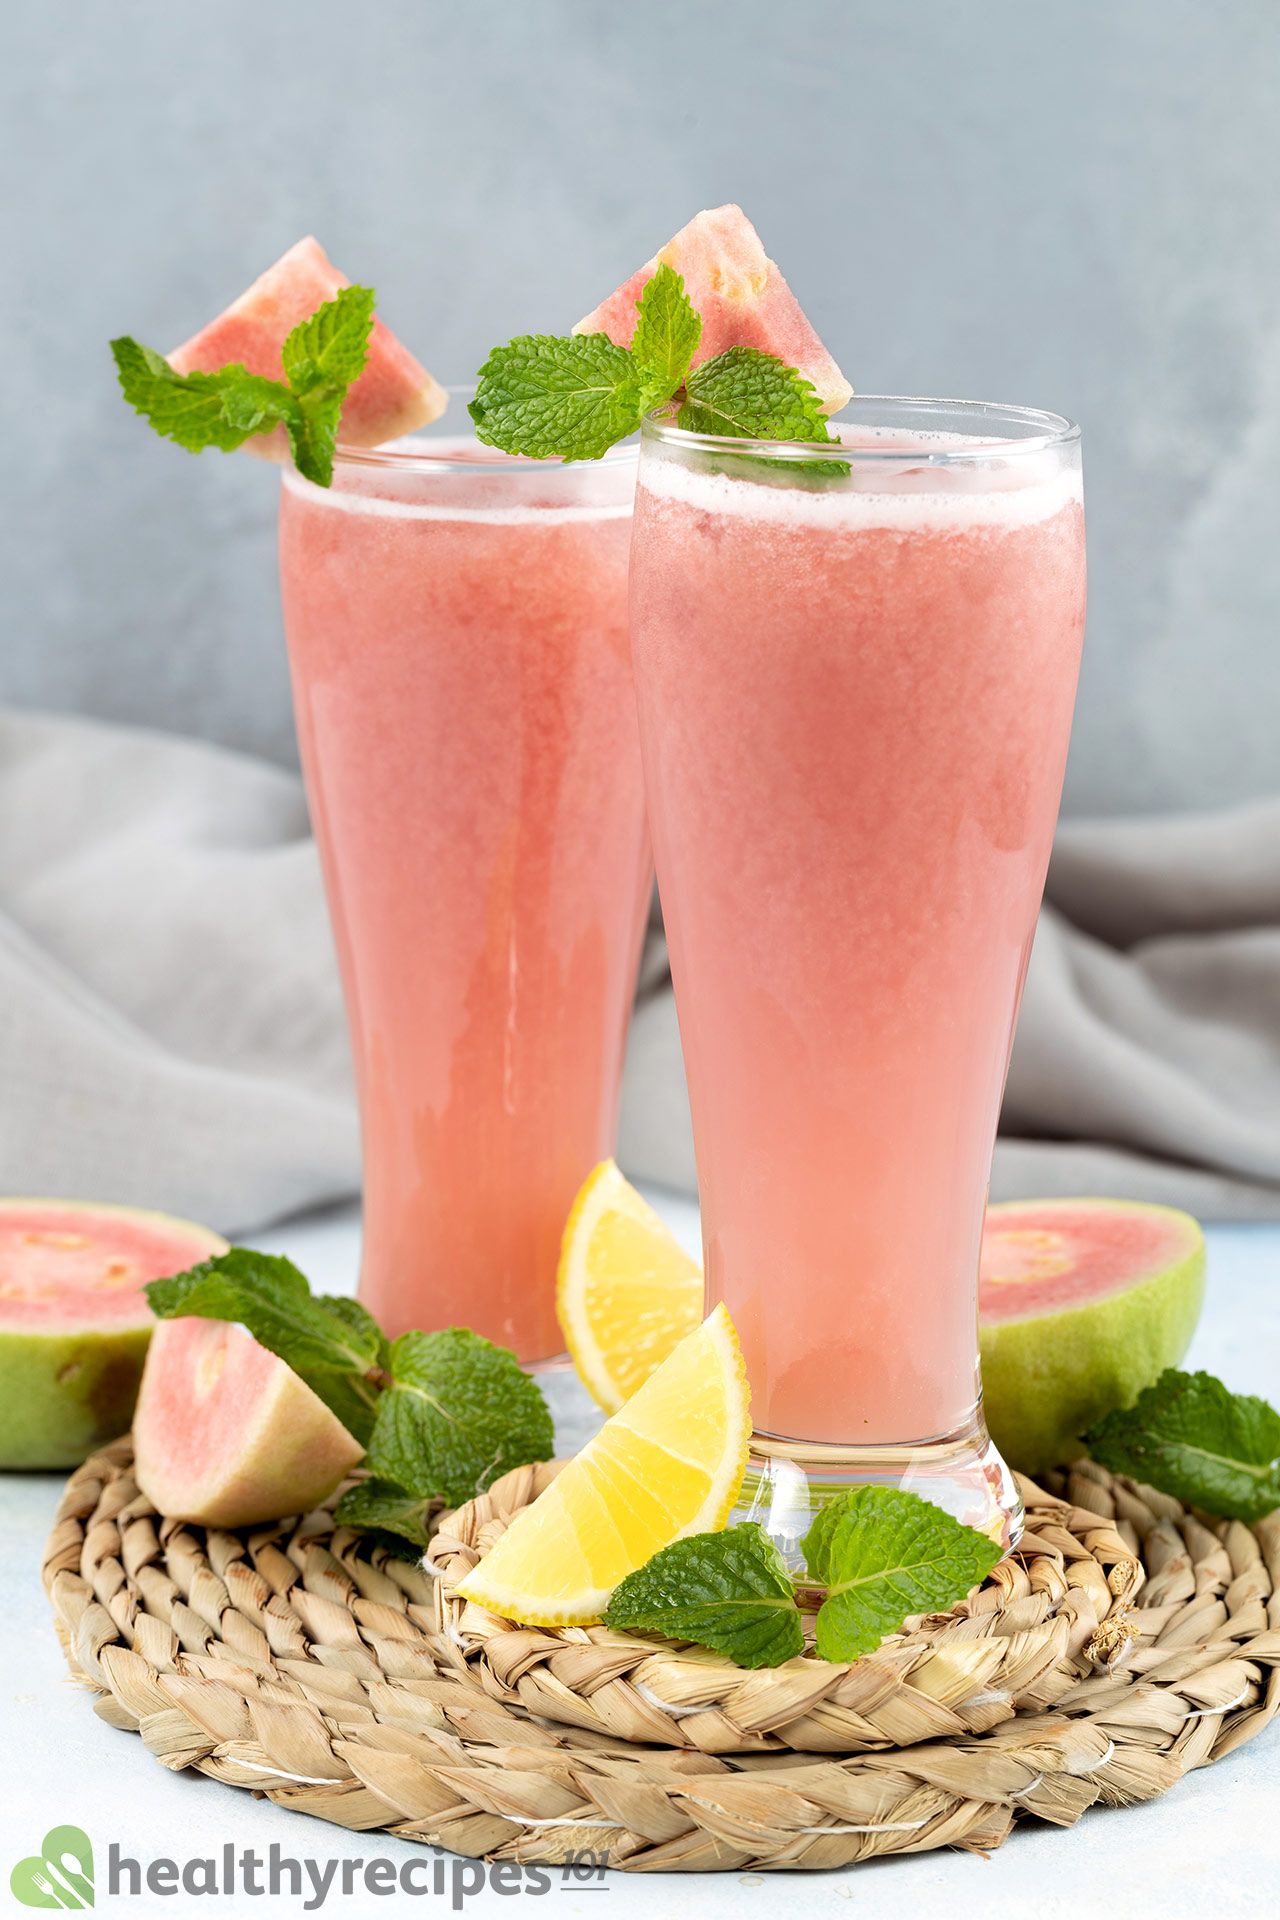 what fruit can go with this guava juice